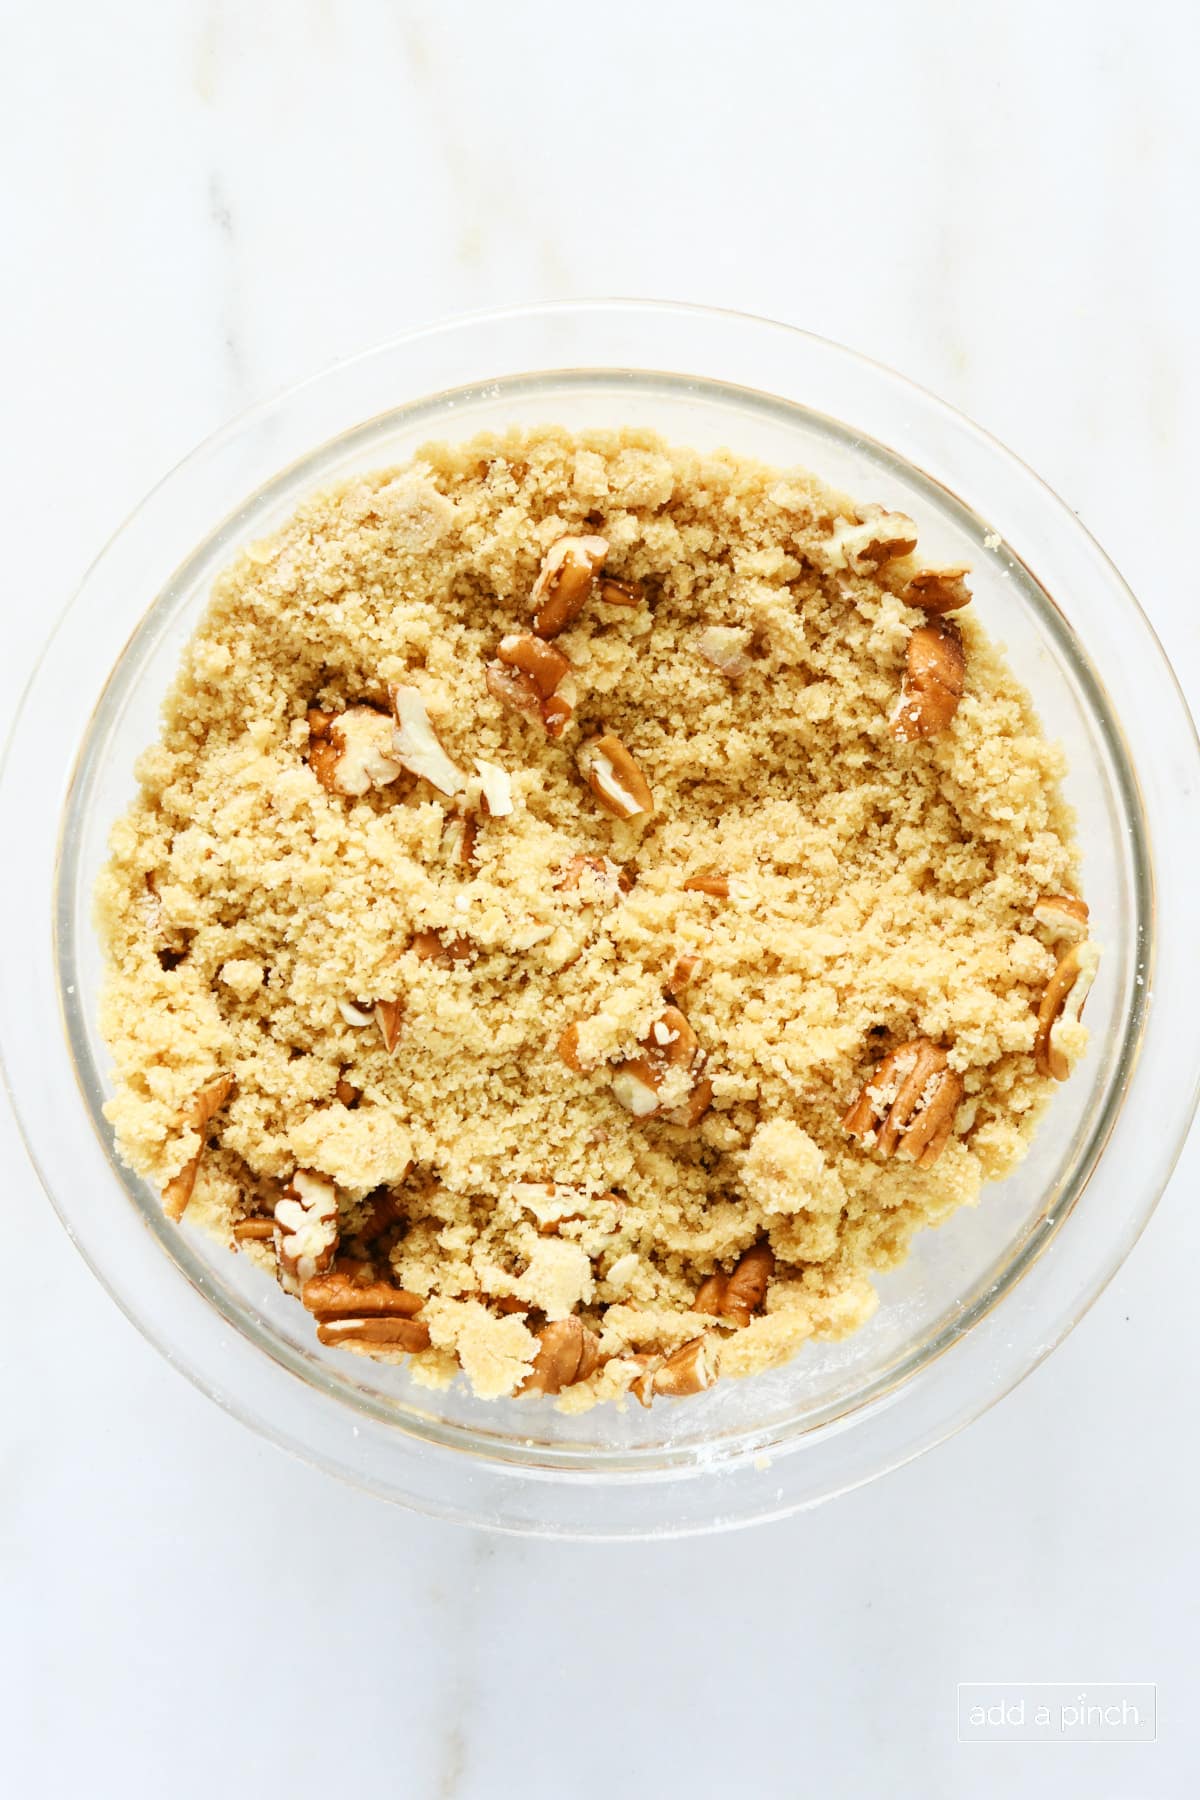 Crumble topping with pecans in a glass bowl.